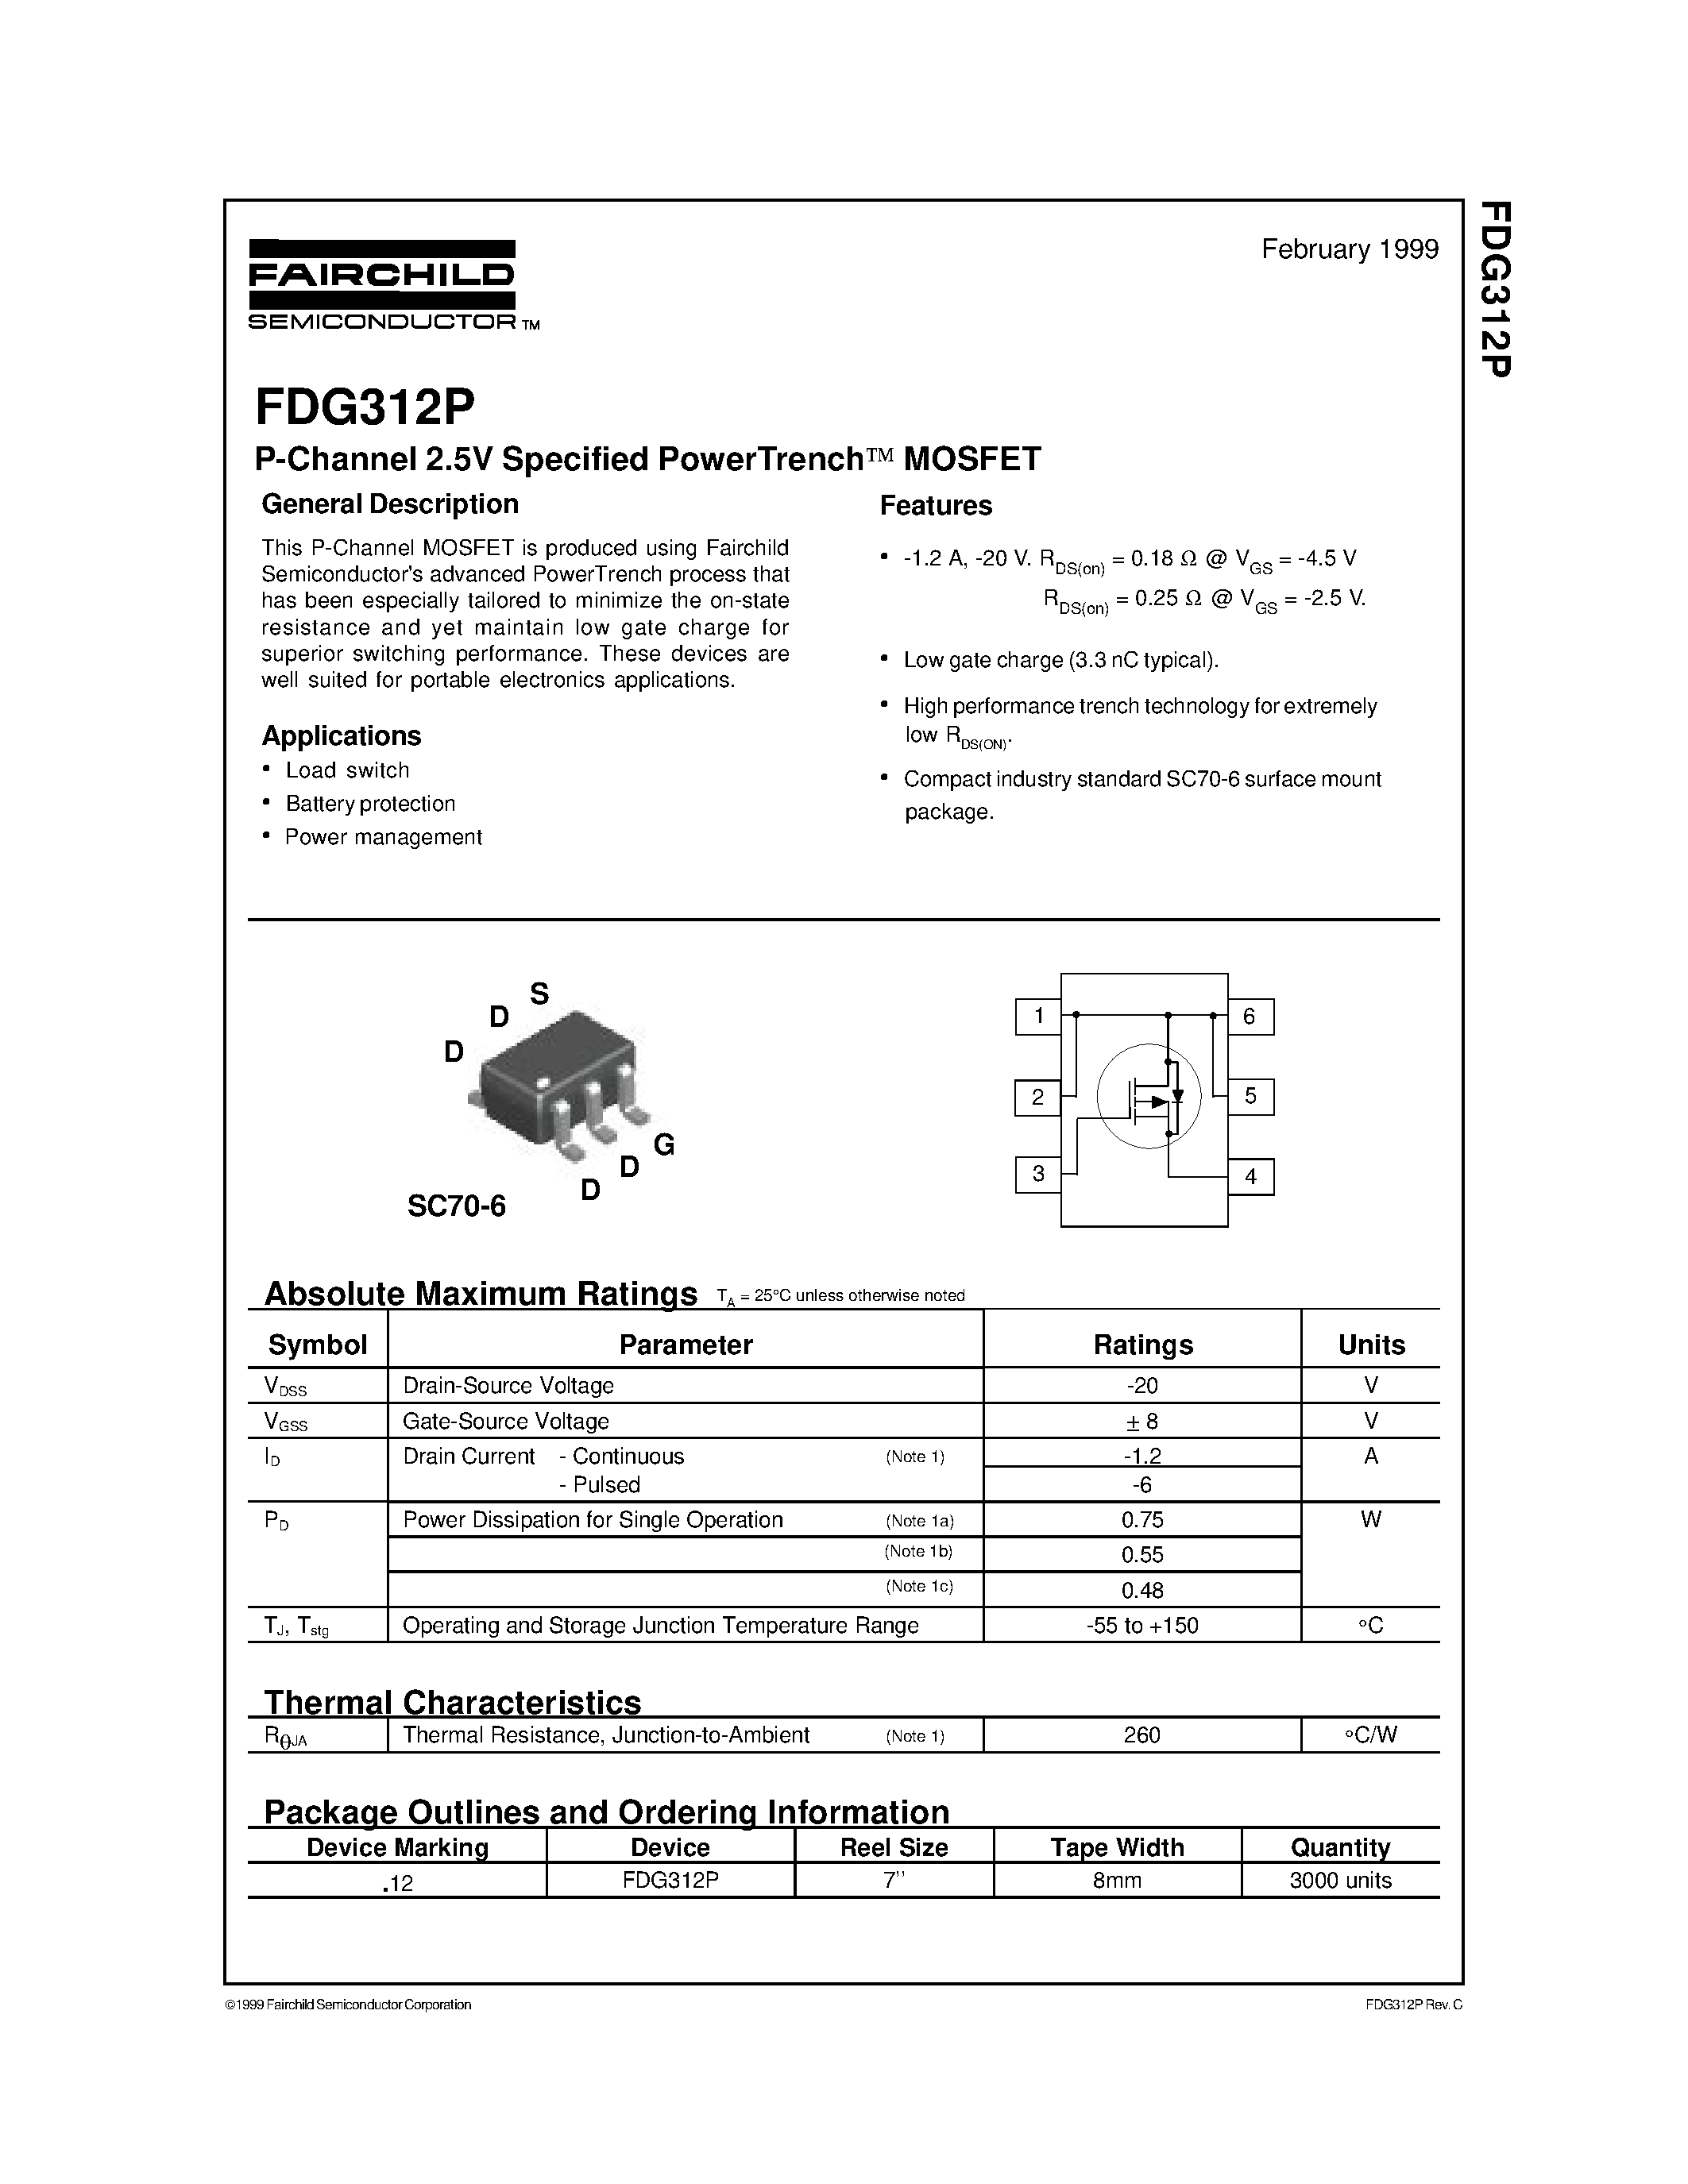 Даташит FDG312P-P-Channel 2.5V Specified PowerTrench MOSFET страница 1